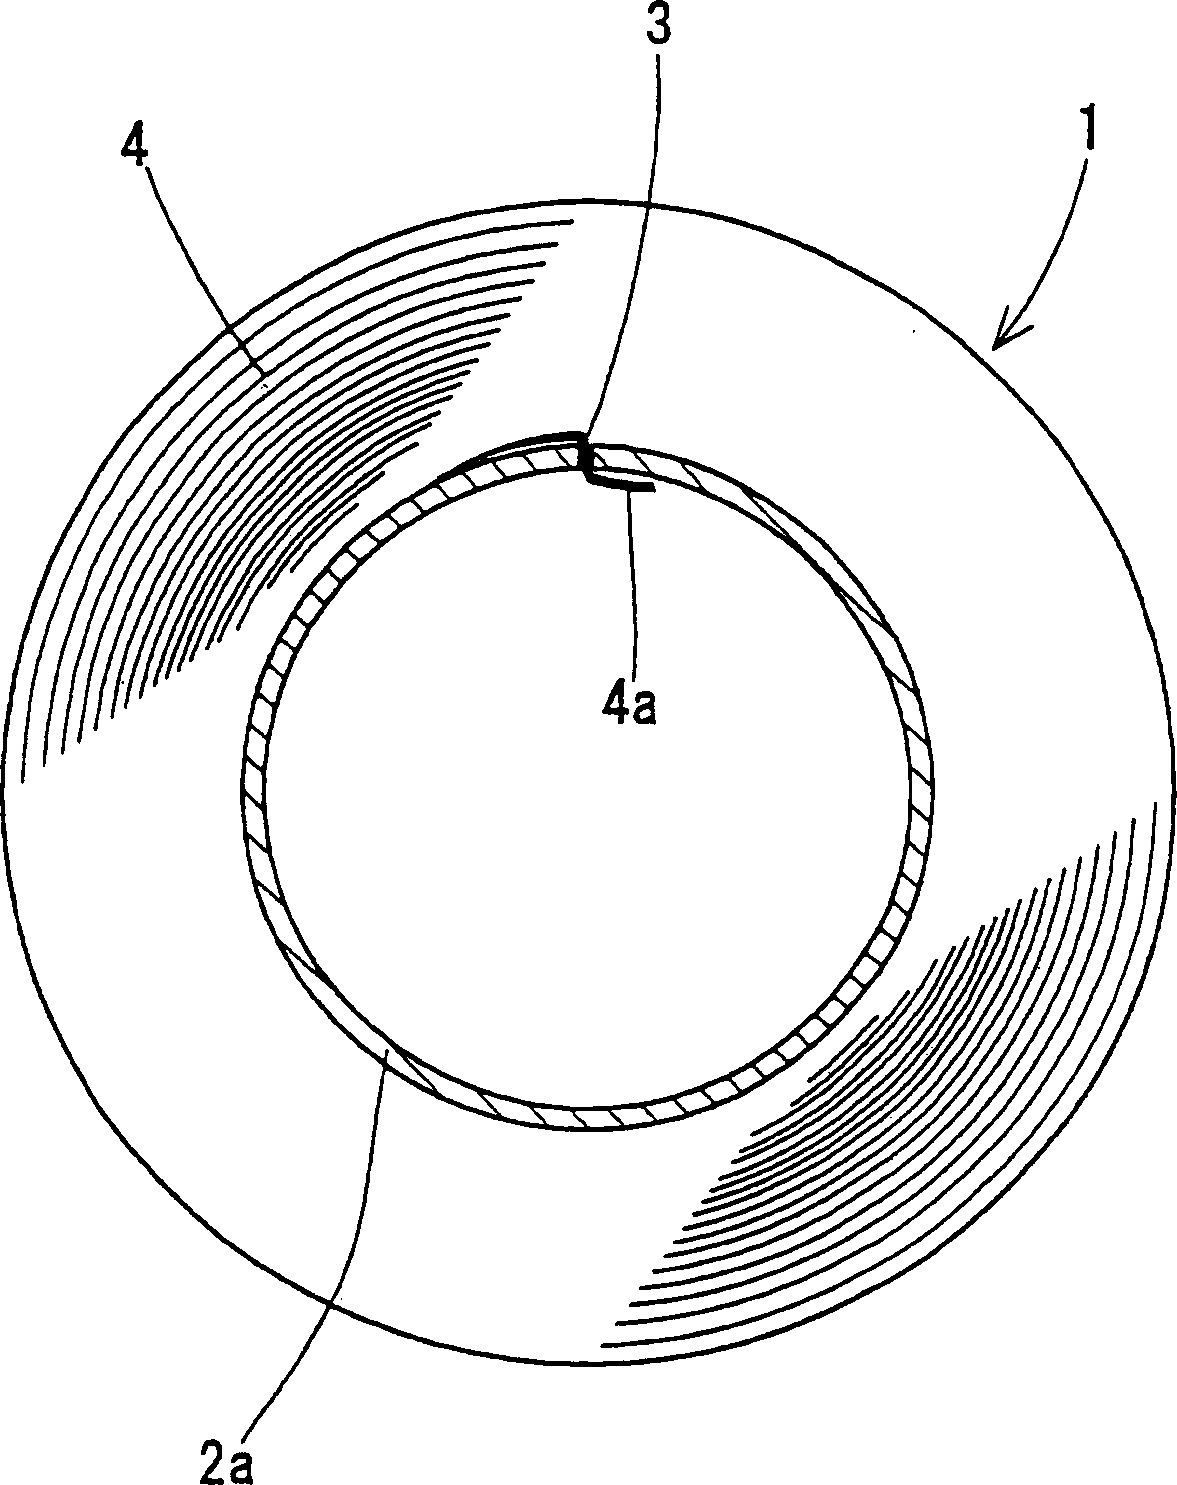 Wound product and its winding method